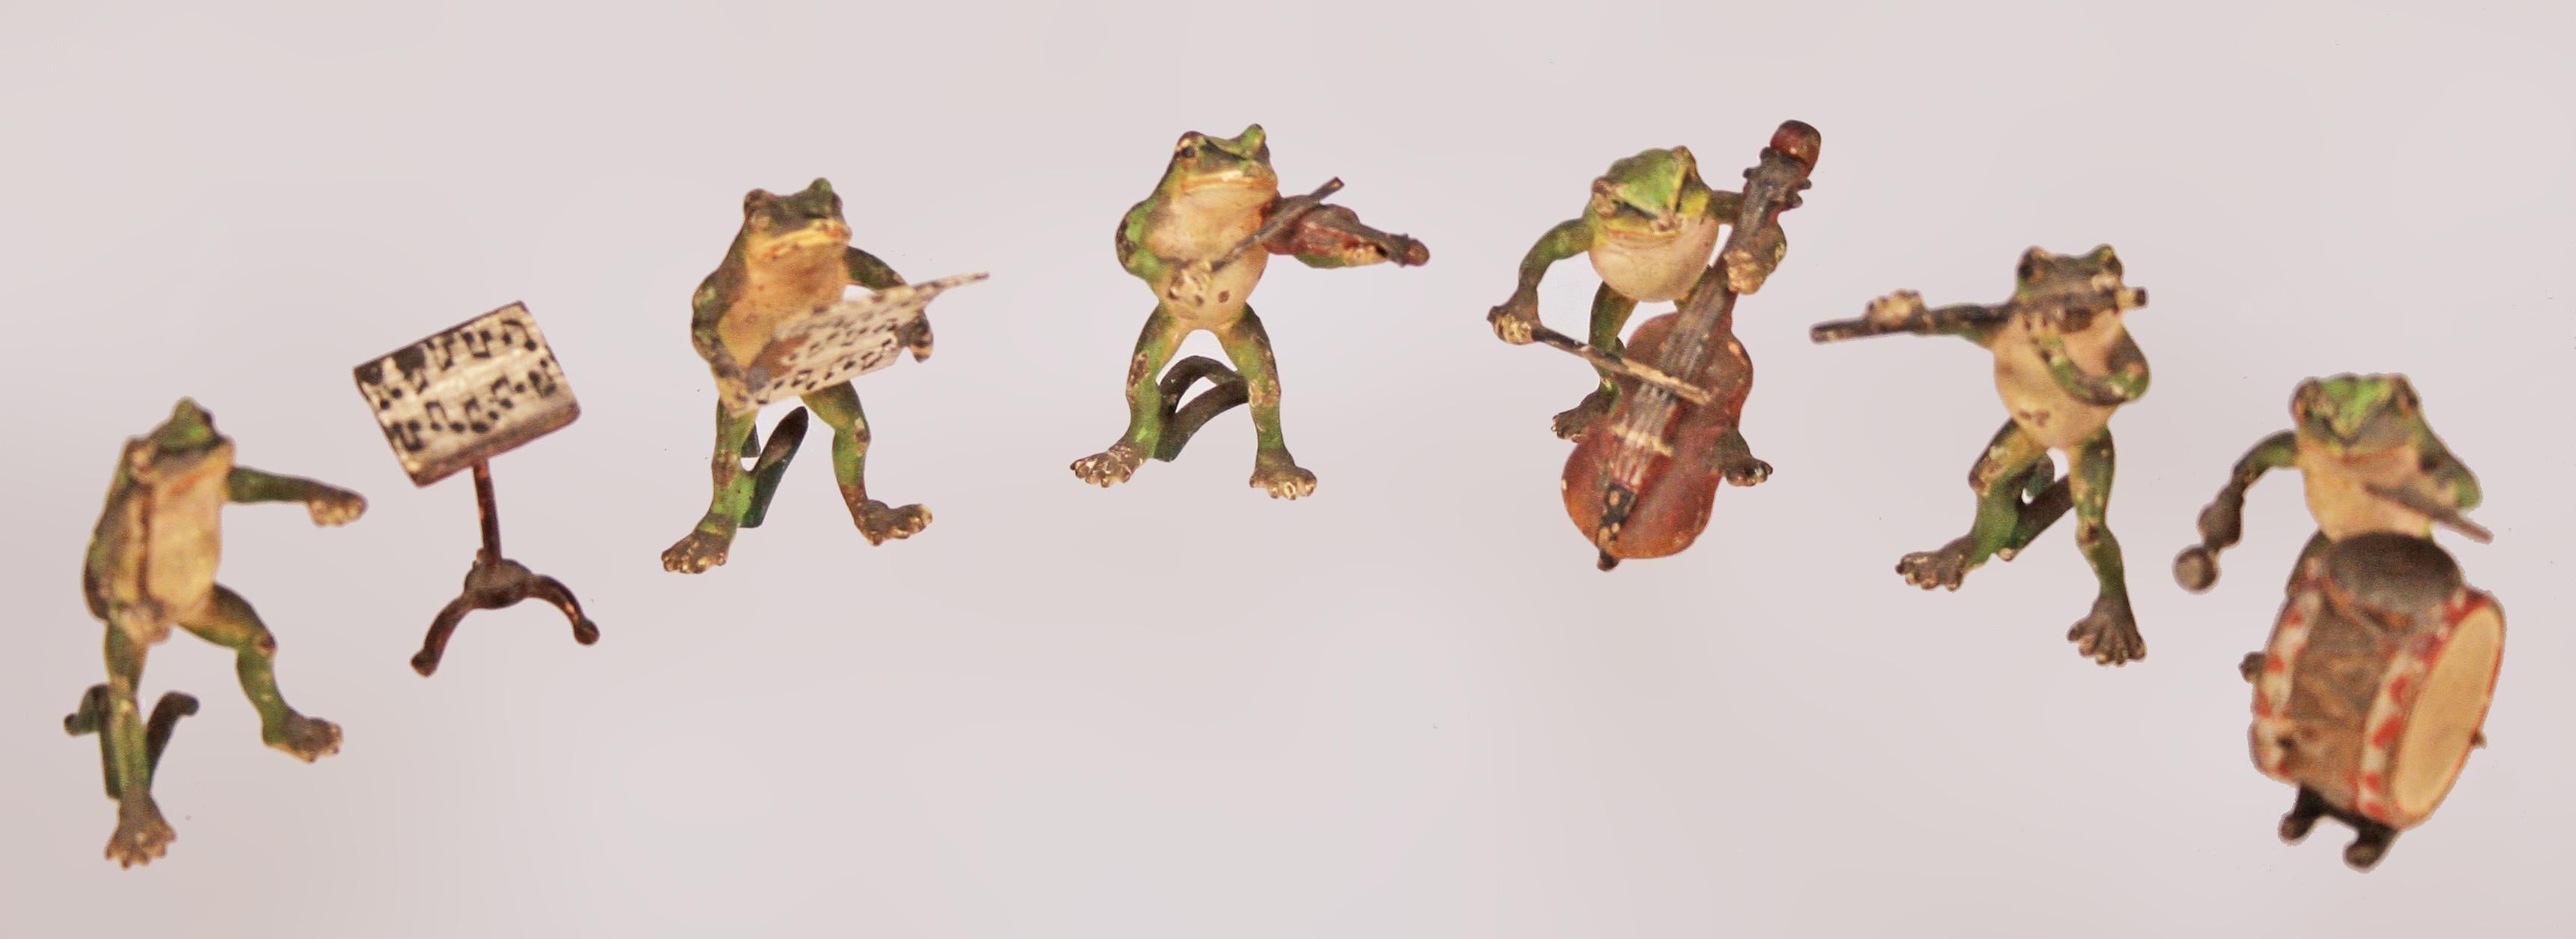 Belle Époque austrian/viennese group of cold-painted small bronze sculptures of band/musician frogs

By: unknown
Material: bronze, paint, copper, metal
Technique: cast, cold-painted, hand-painted, molded, painted, metalwork
Dimensions: 1 in x 1 in x